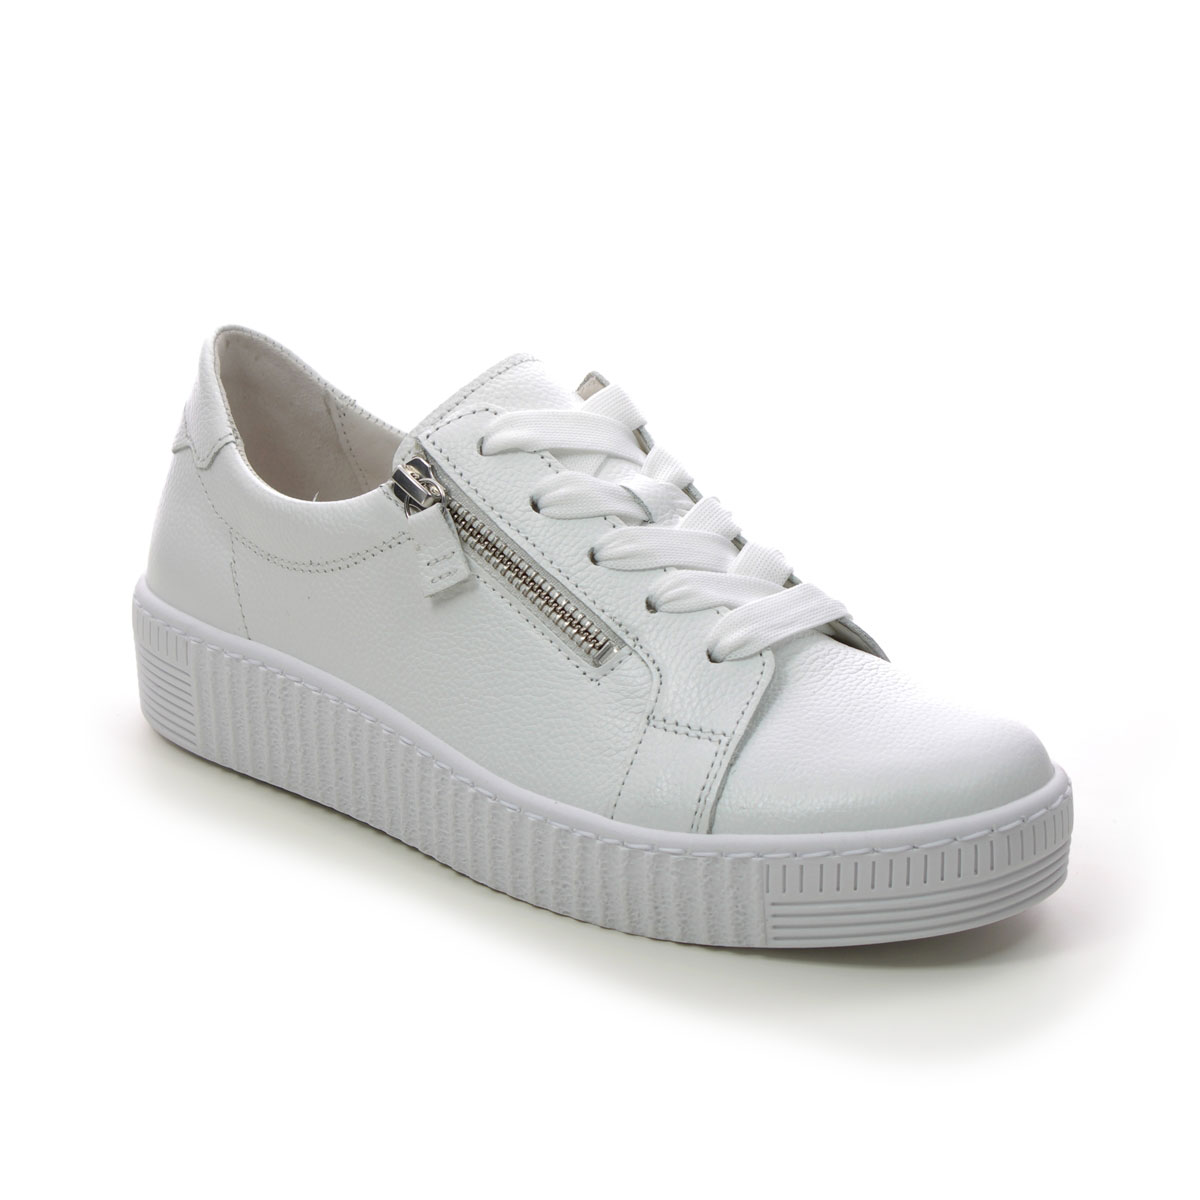 Gabor Wisdom White Leather Womens Trainers 23.334.21 In Size 5.5 In Plain White Leather  Womens Trainers In Soft White Leather Leather